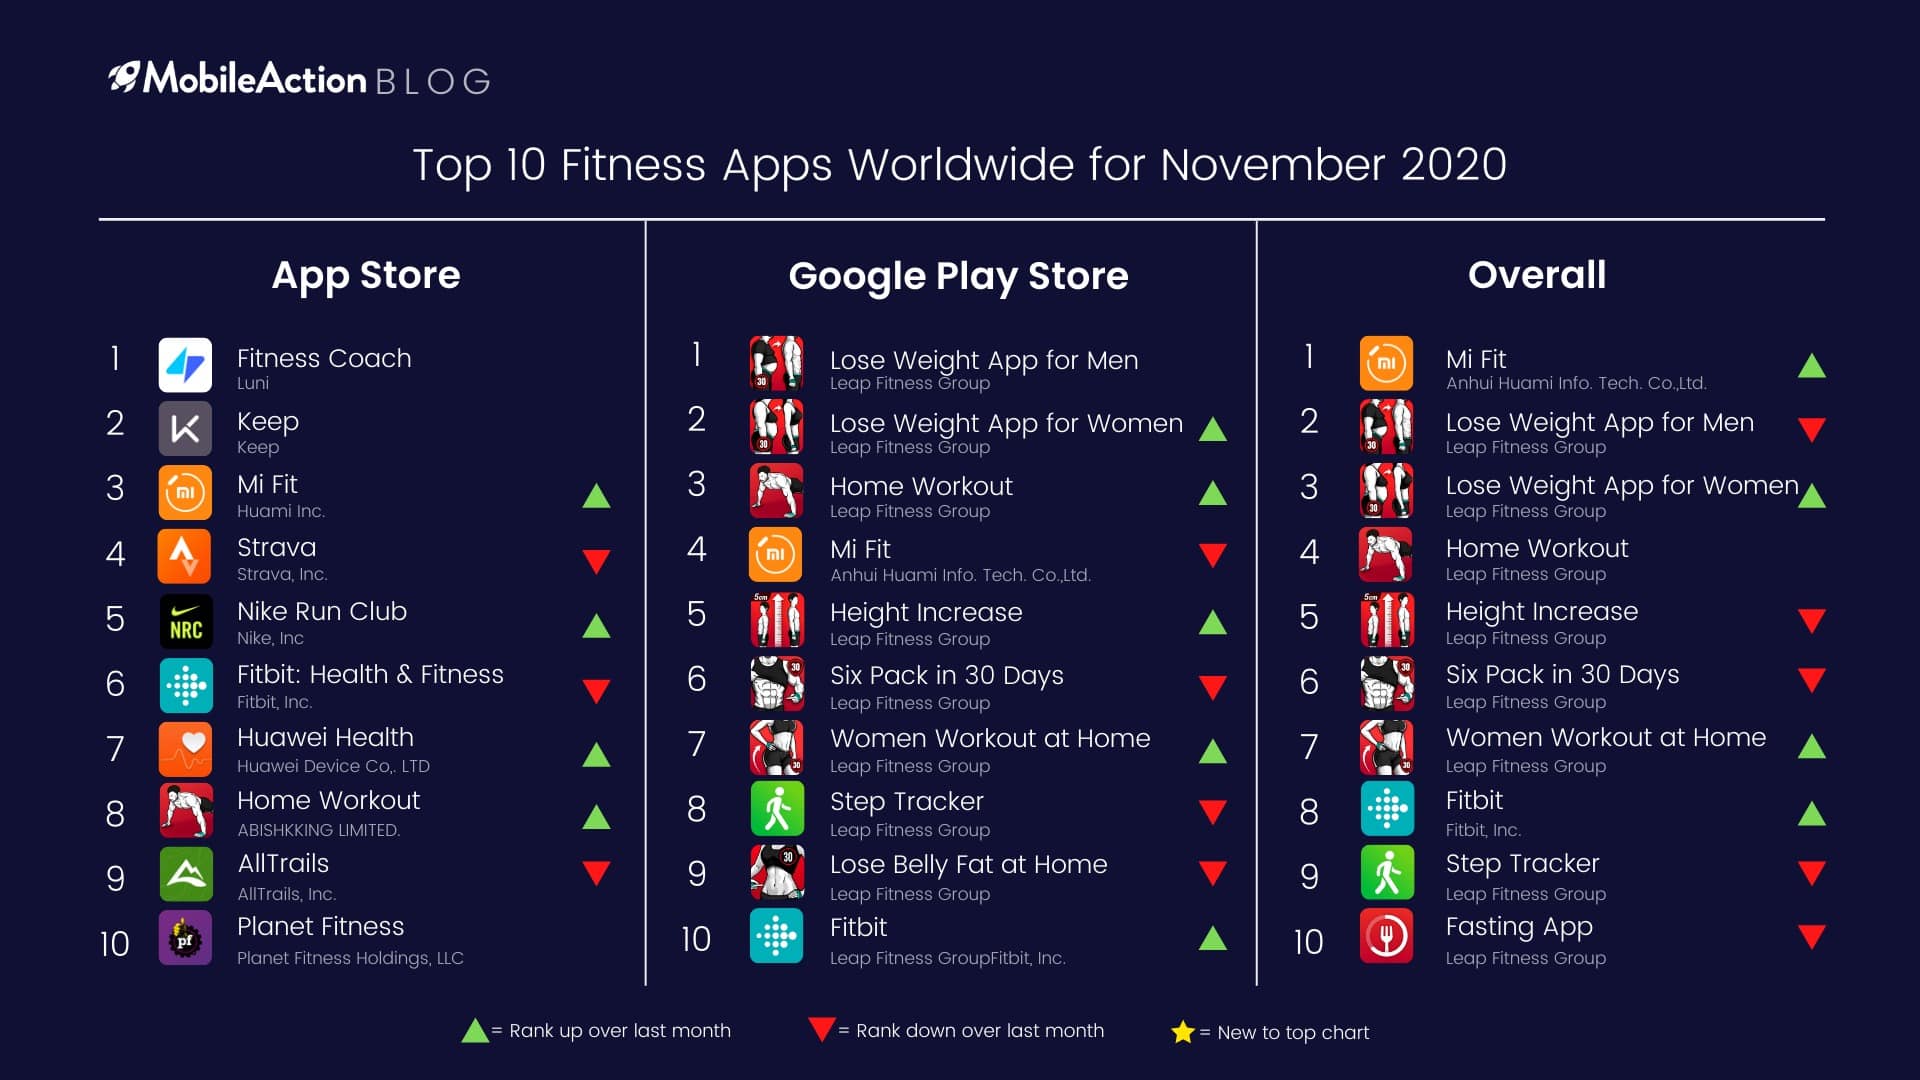 top fitness apps android and IOS november 2020 worldwide